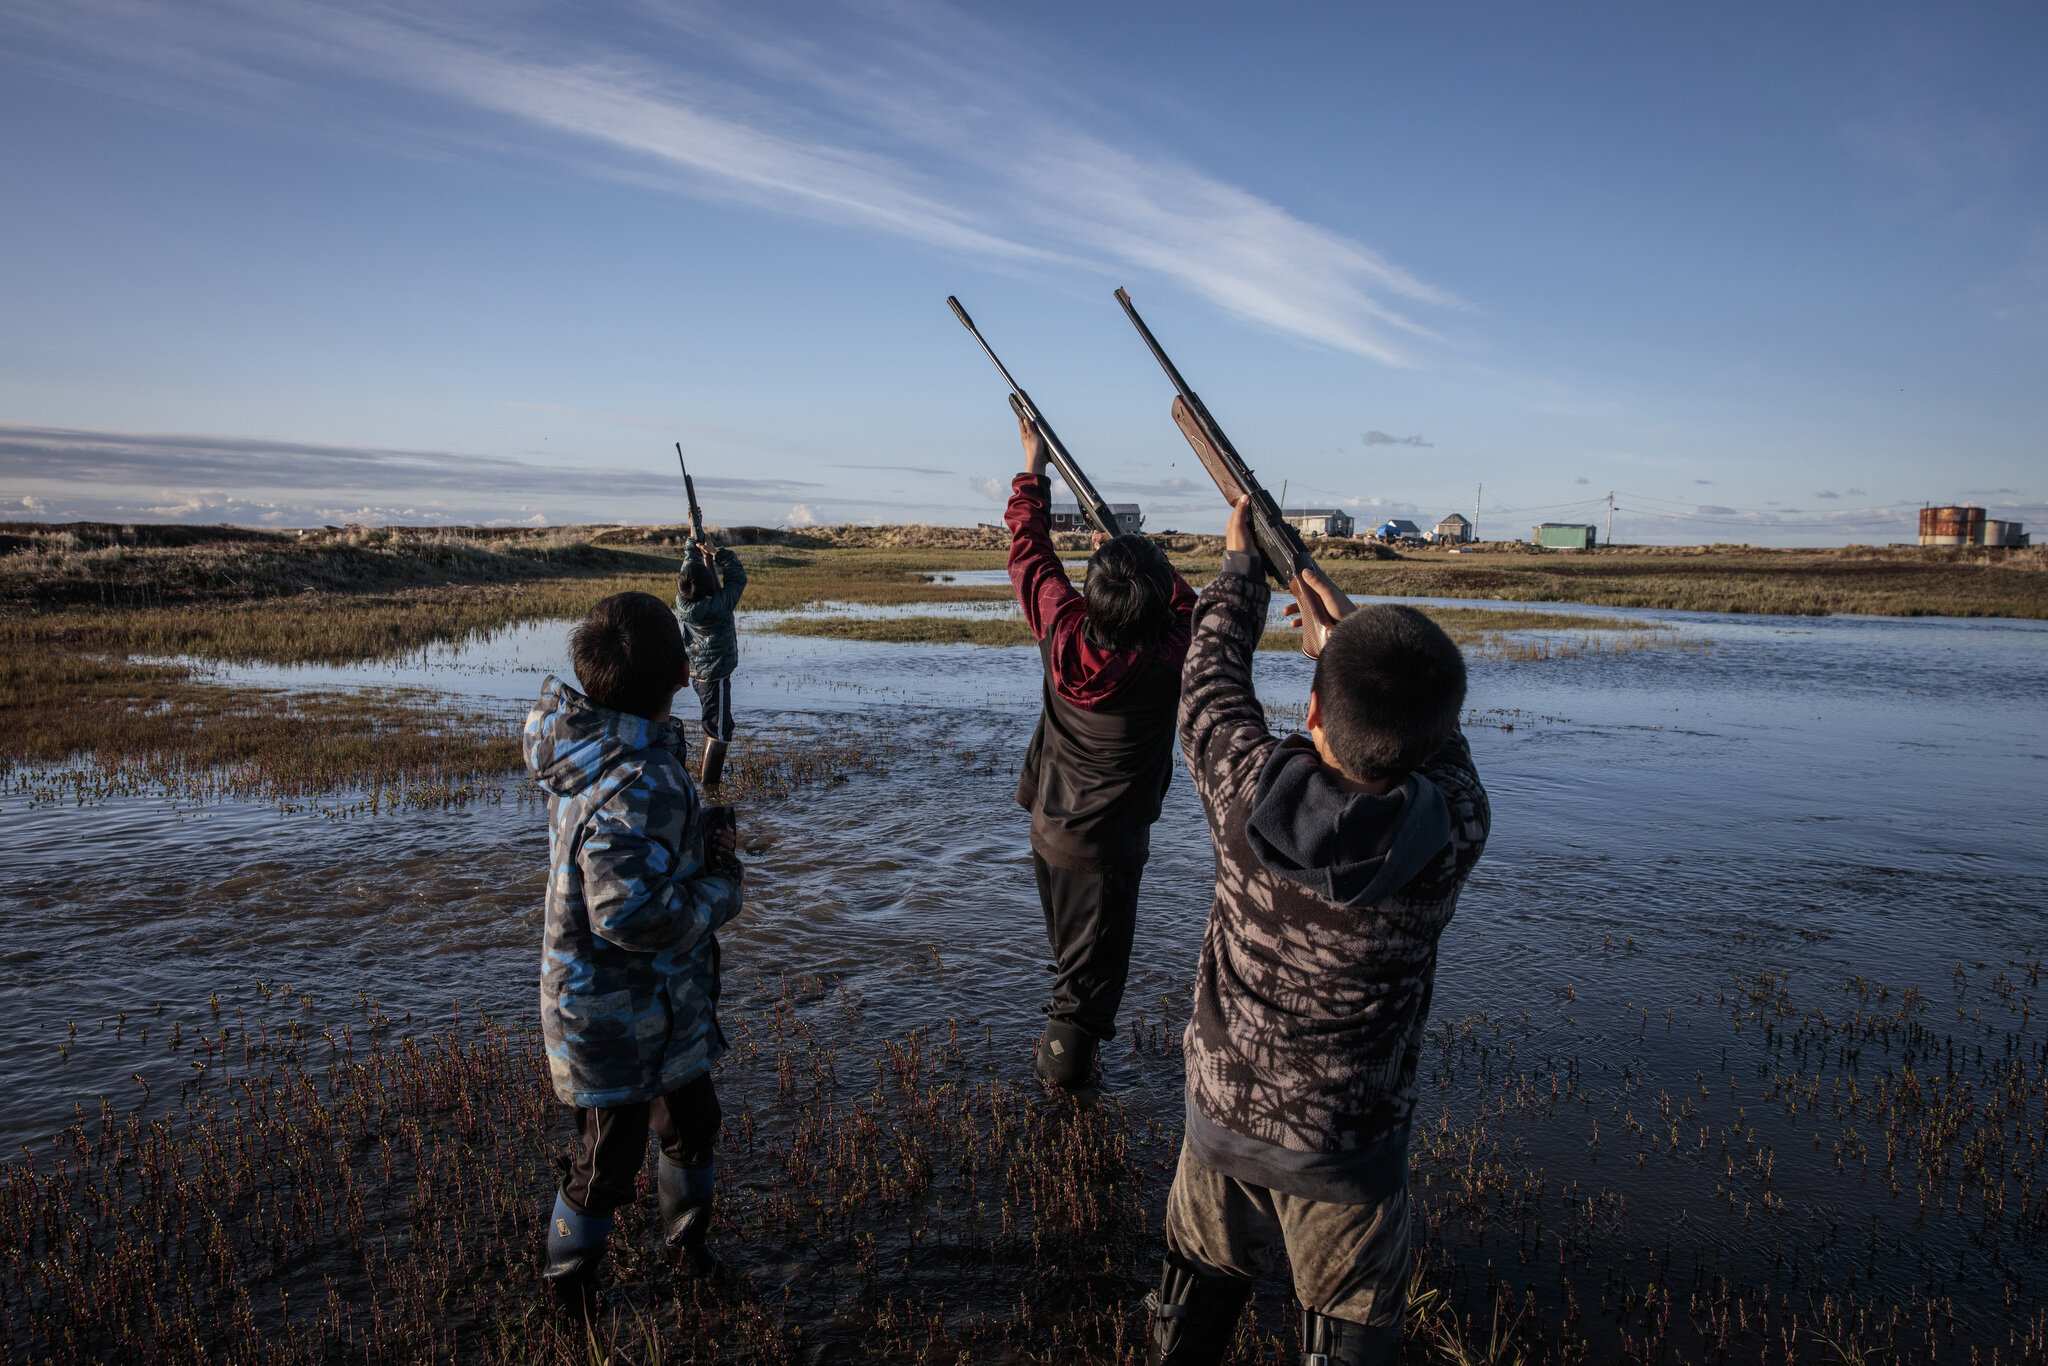  Boys on a summer bird hunt in the flooding village of Newtok, Alaska. May 27th, 2019. The Yupik village of Newtok, Alaska, population 380, is sinking as the permafrost beneath it thaws. Erosion has already wiped out nearly a mile of Newtok’s land, a